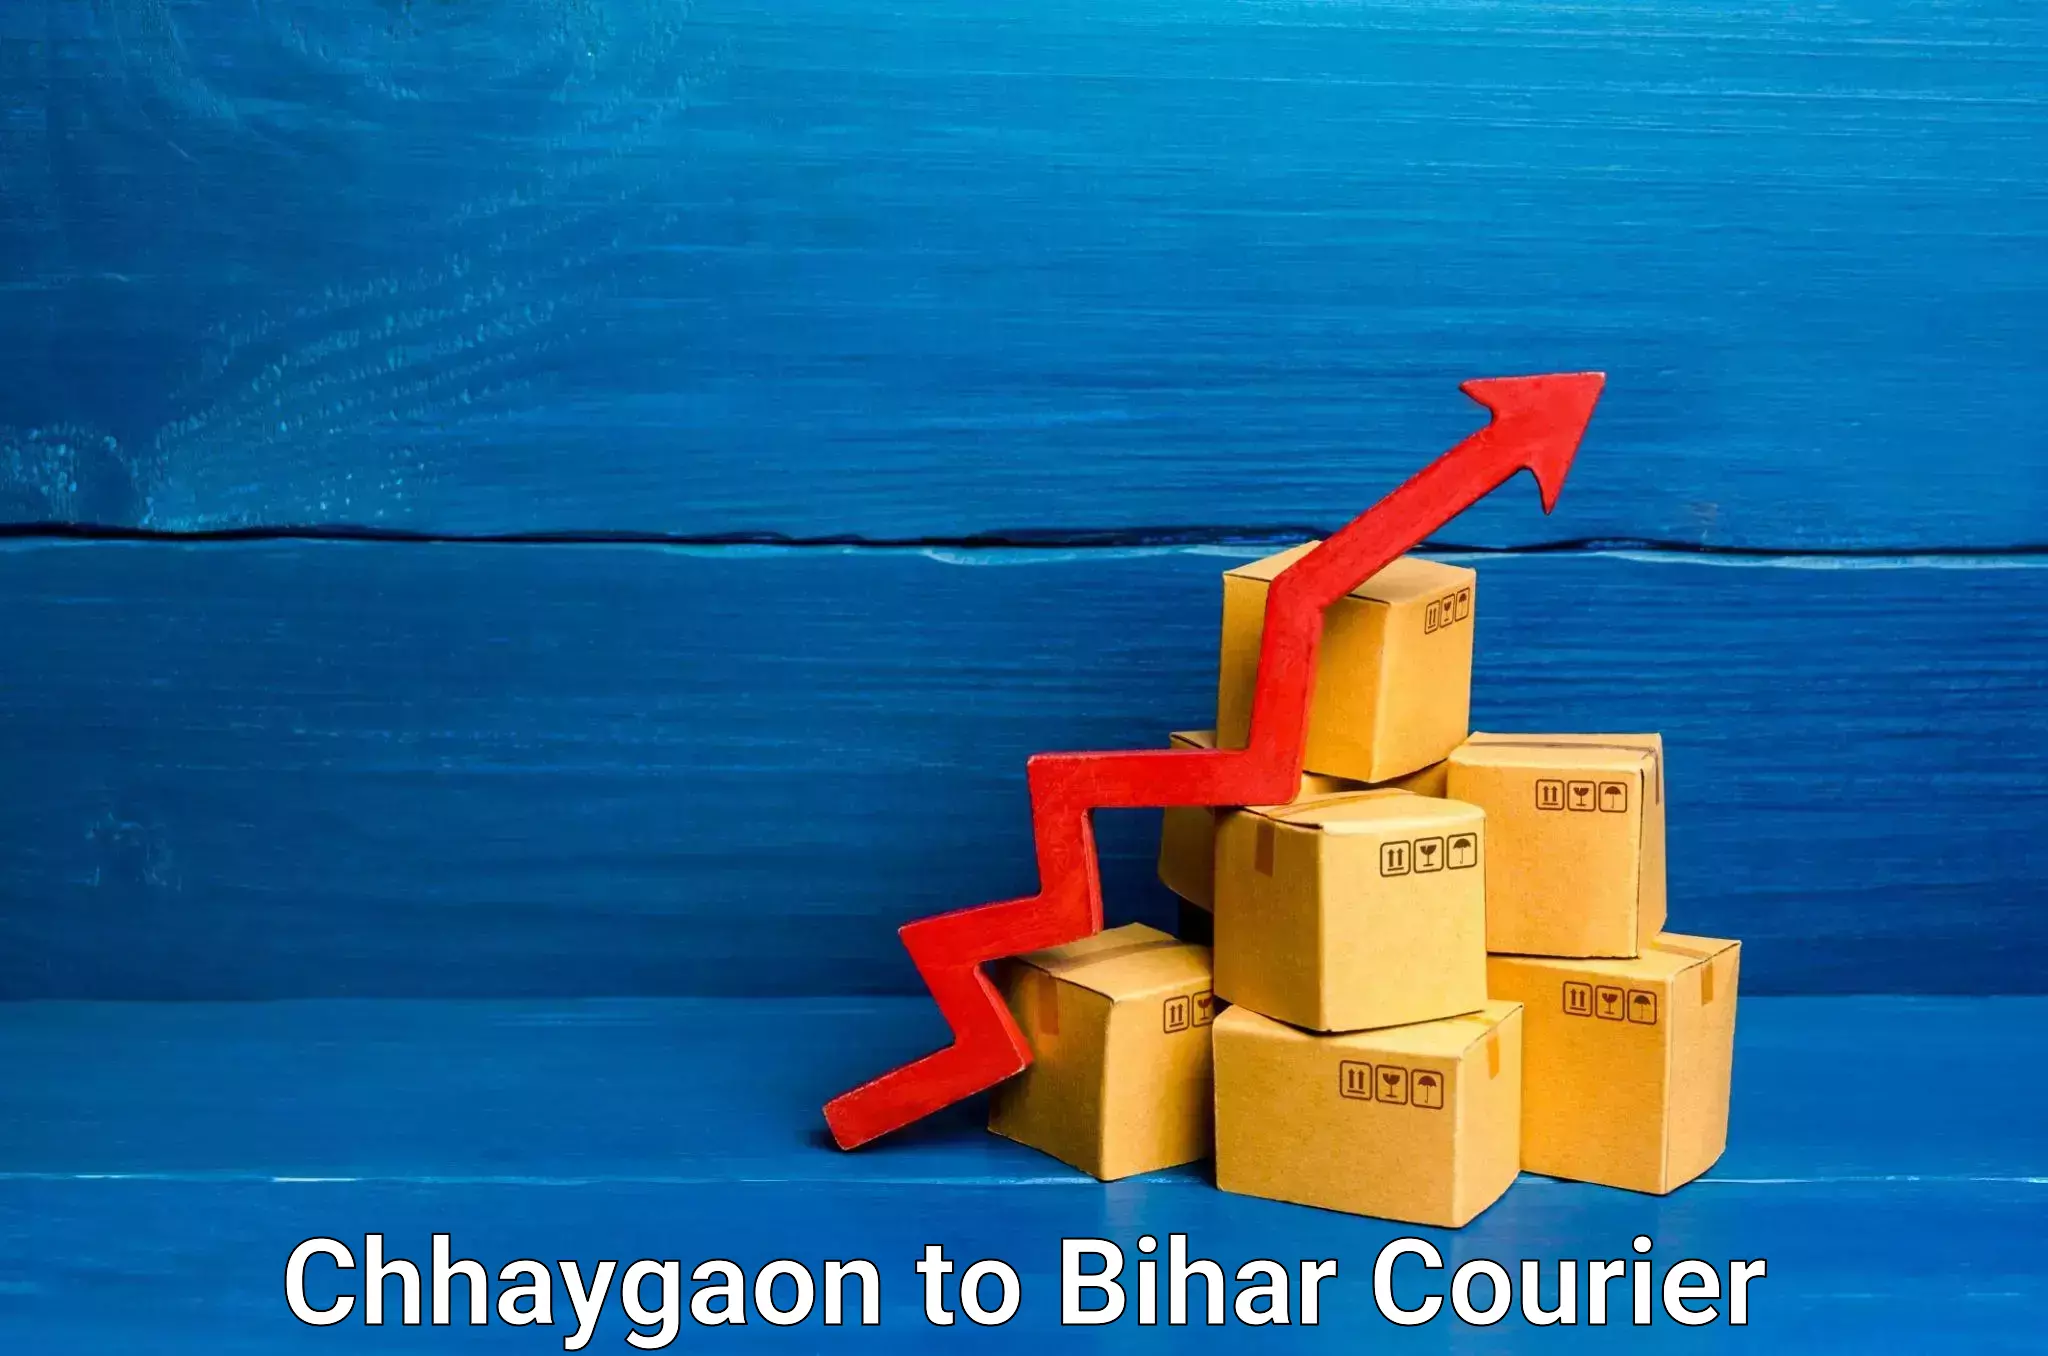 Automated parcel services Chhaygaon to Narkatiaganj